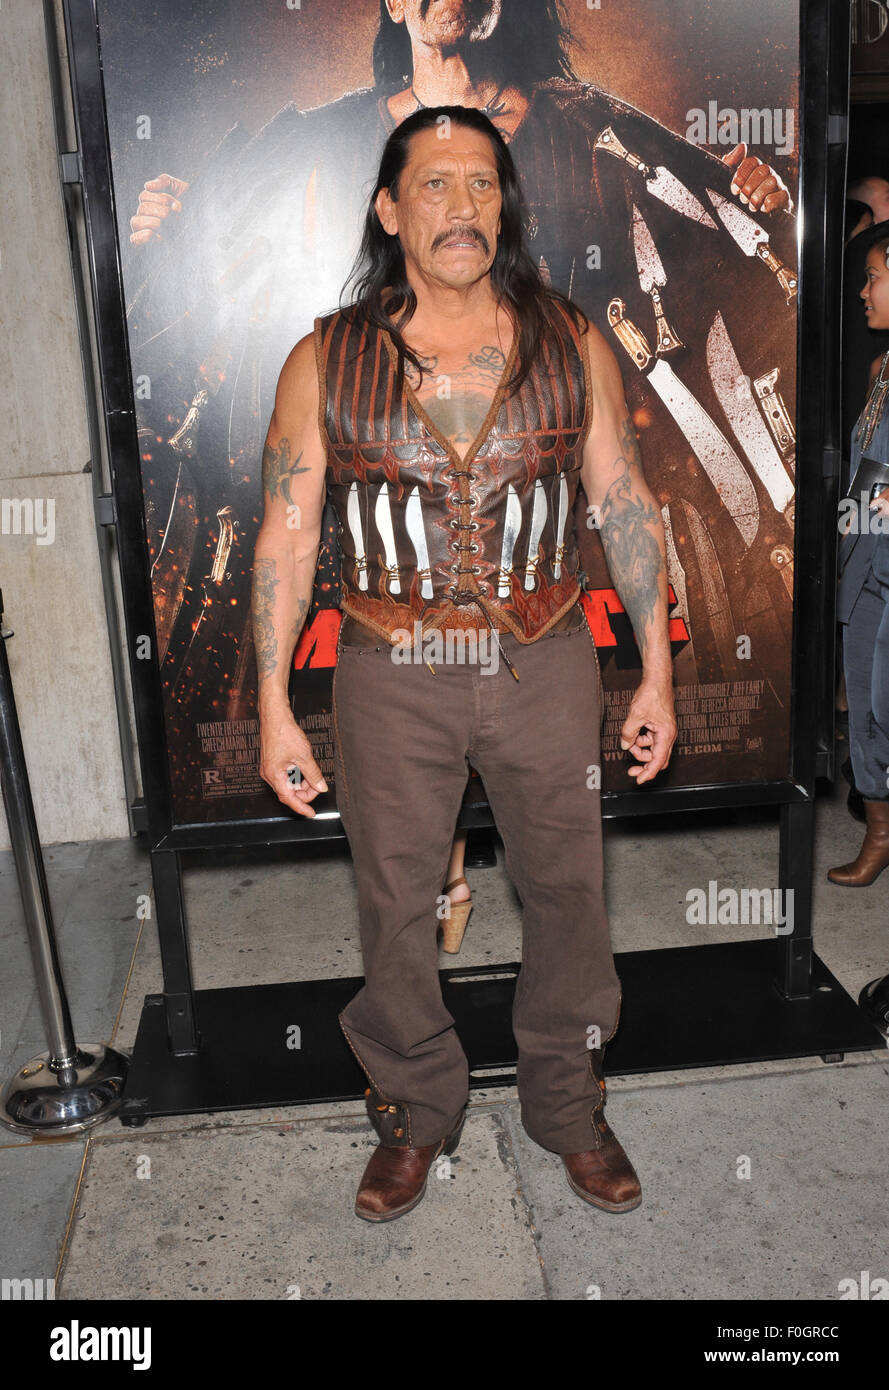 LOS ANGELES, CA - AUGUST 25, 2010: Danny Trejo at the Los Angeles premiere  of his new movie "Machete" at The Orpheum Theatre Stock Photo - Alamy